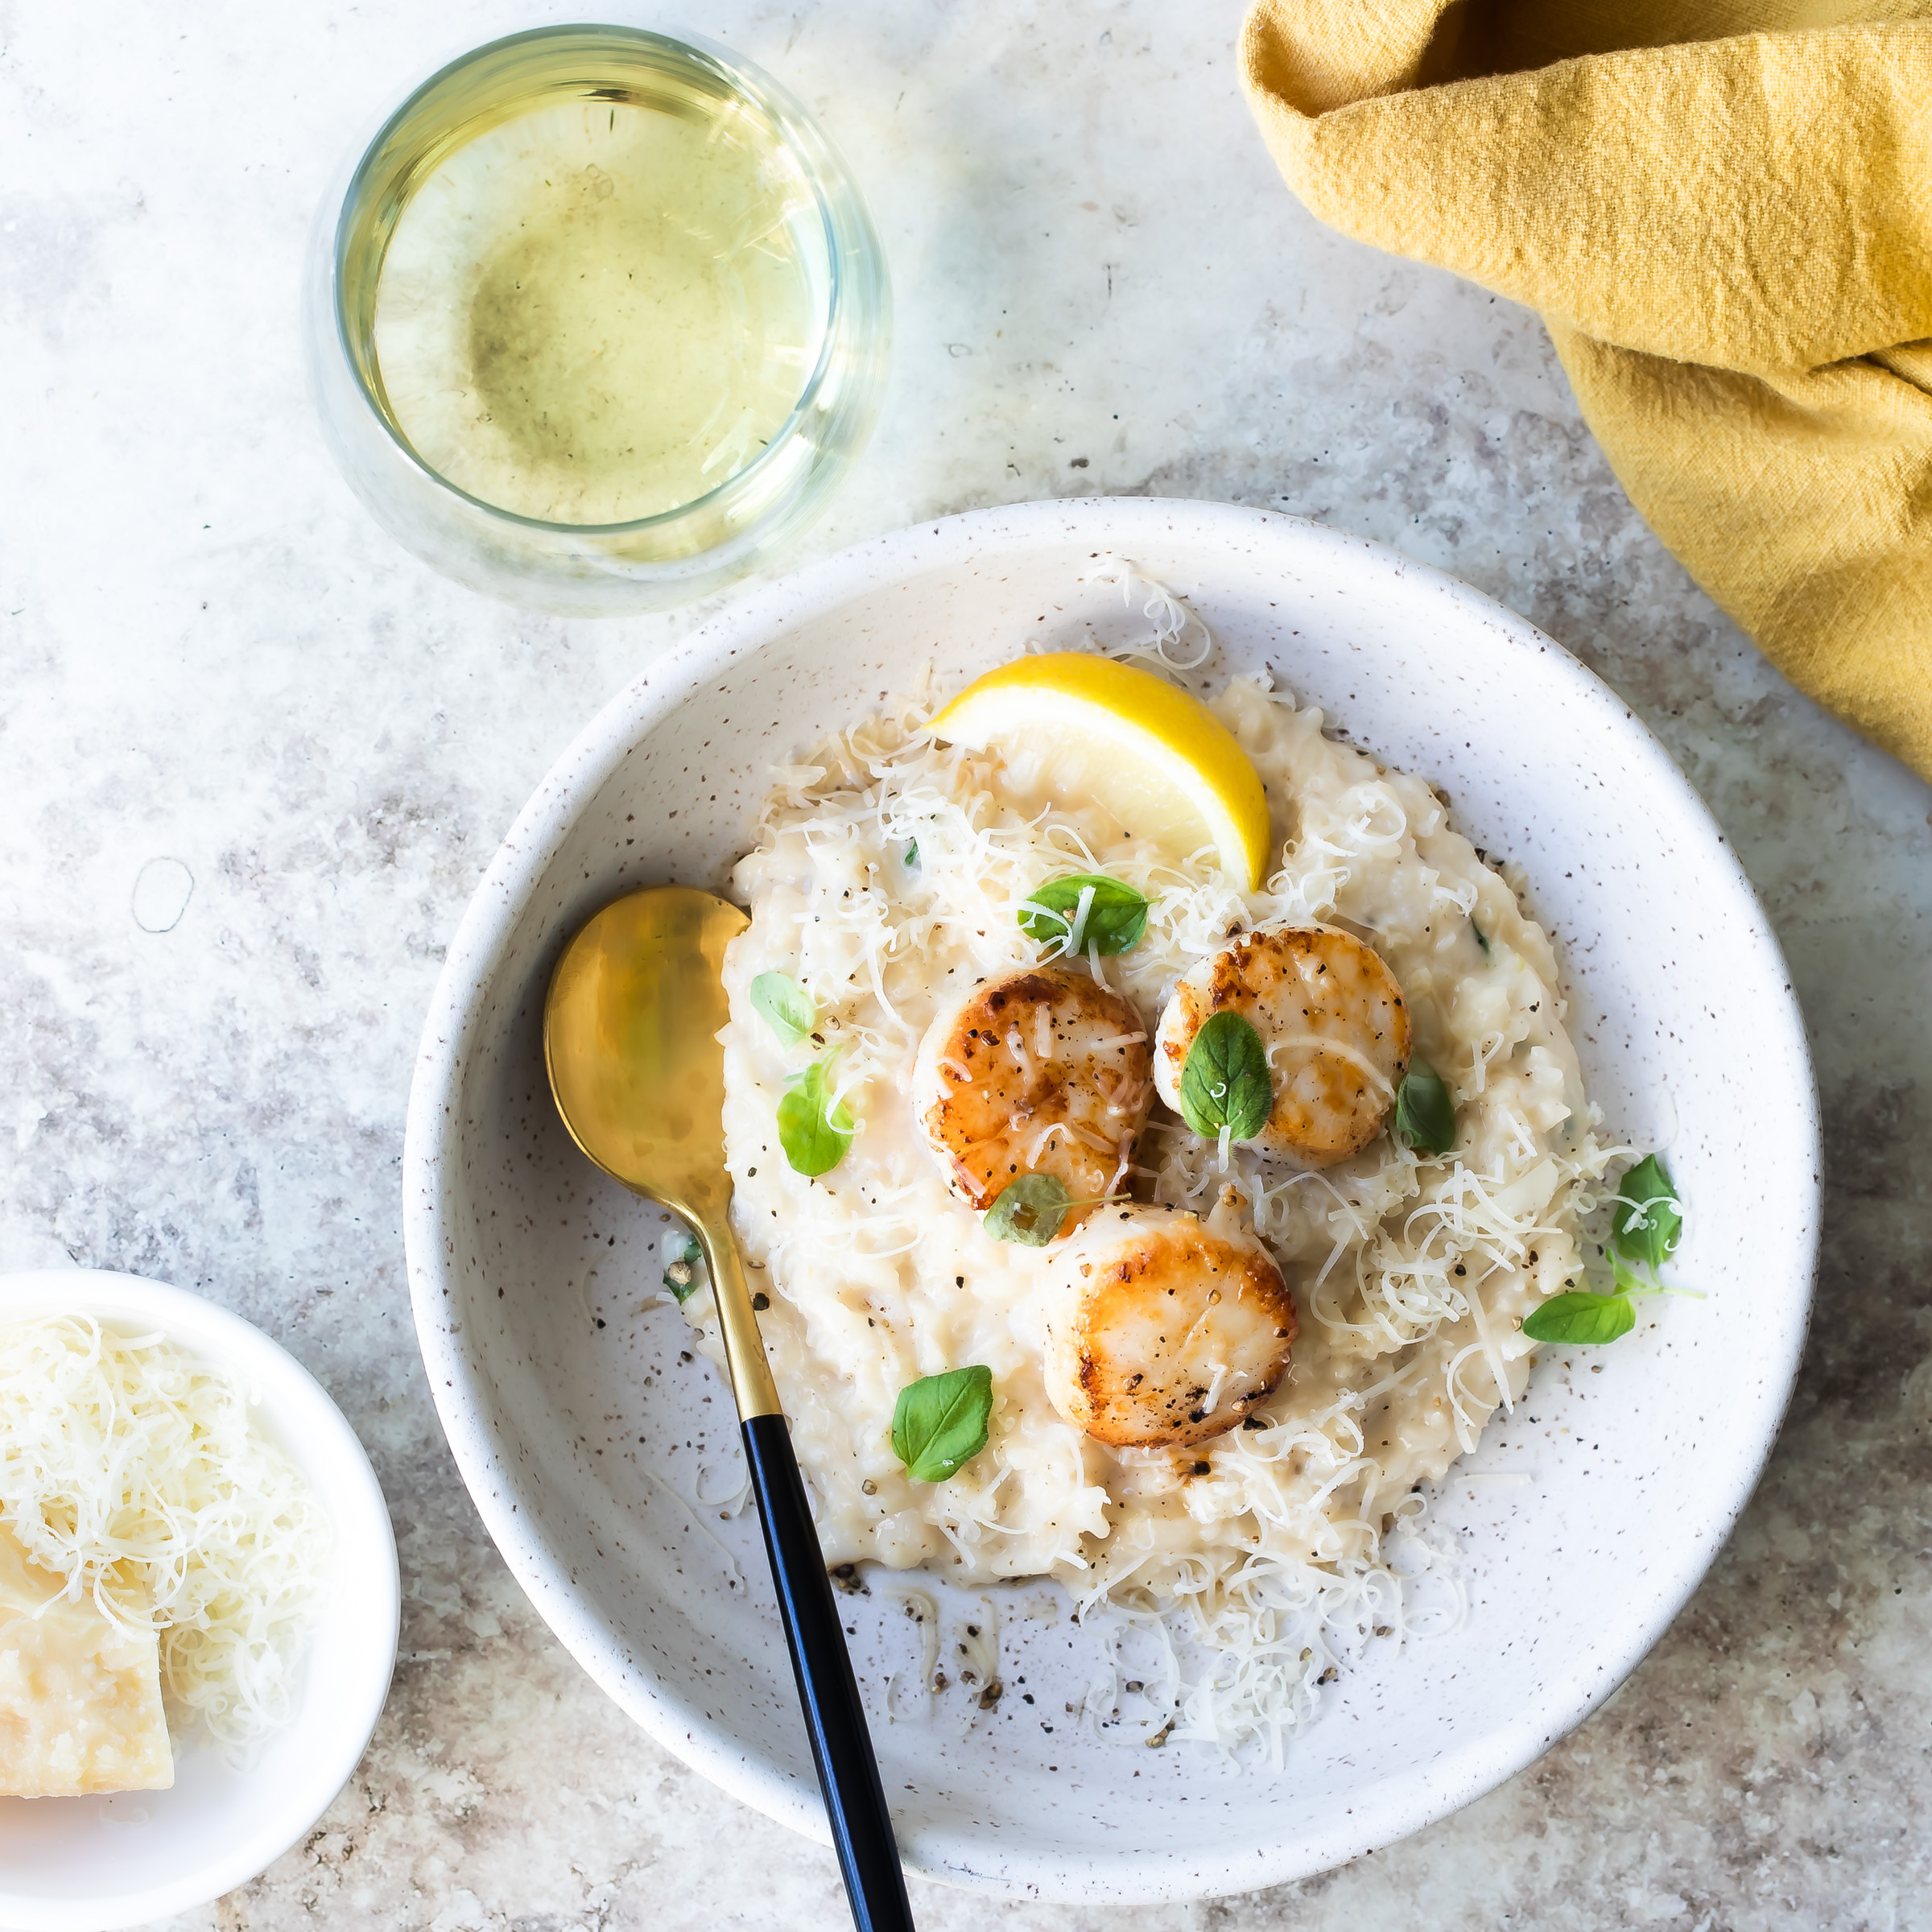 Scallops with Garlic and Lemon Risotto